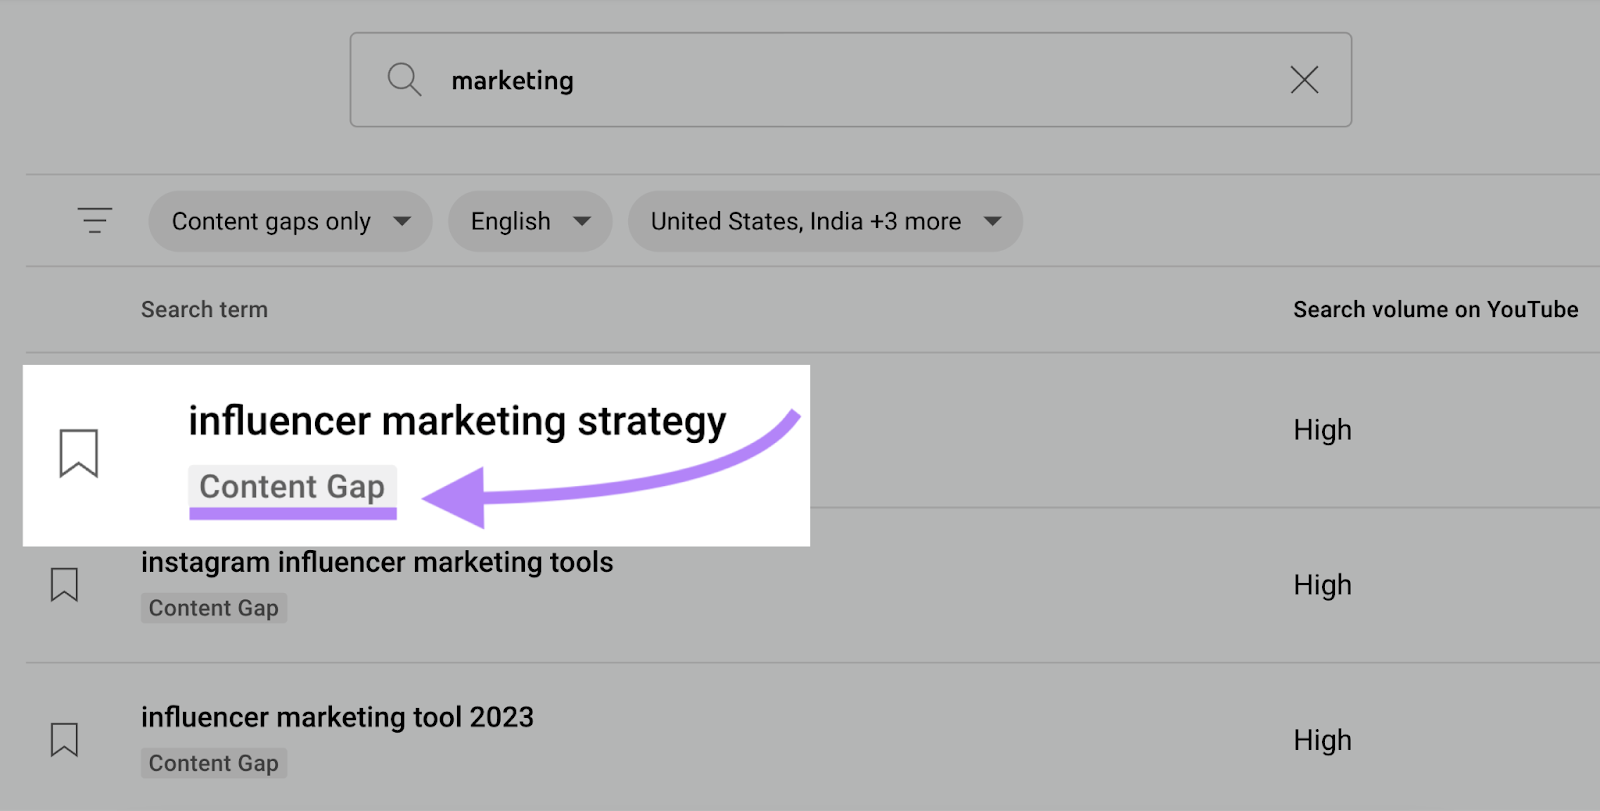 "Influencer marketing strategy" search term marked with the “Content Gap” tag.